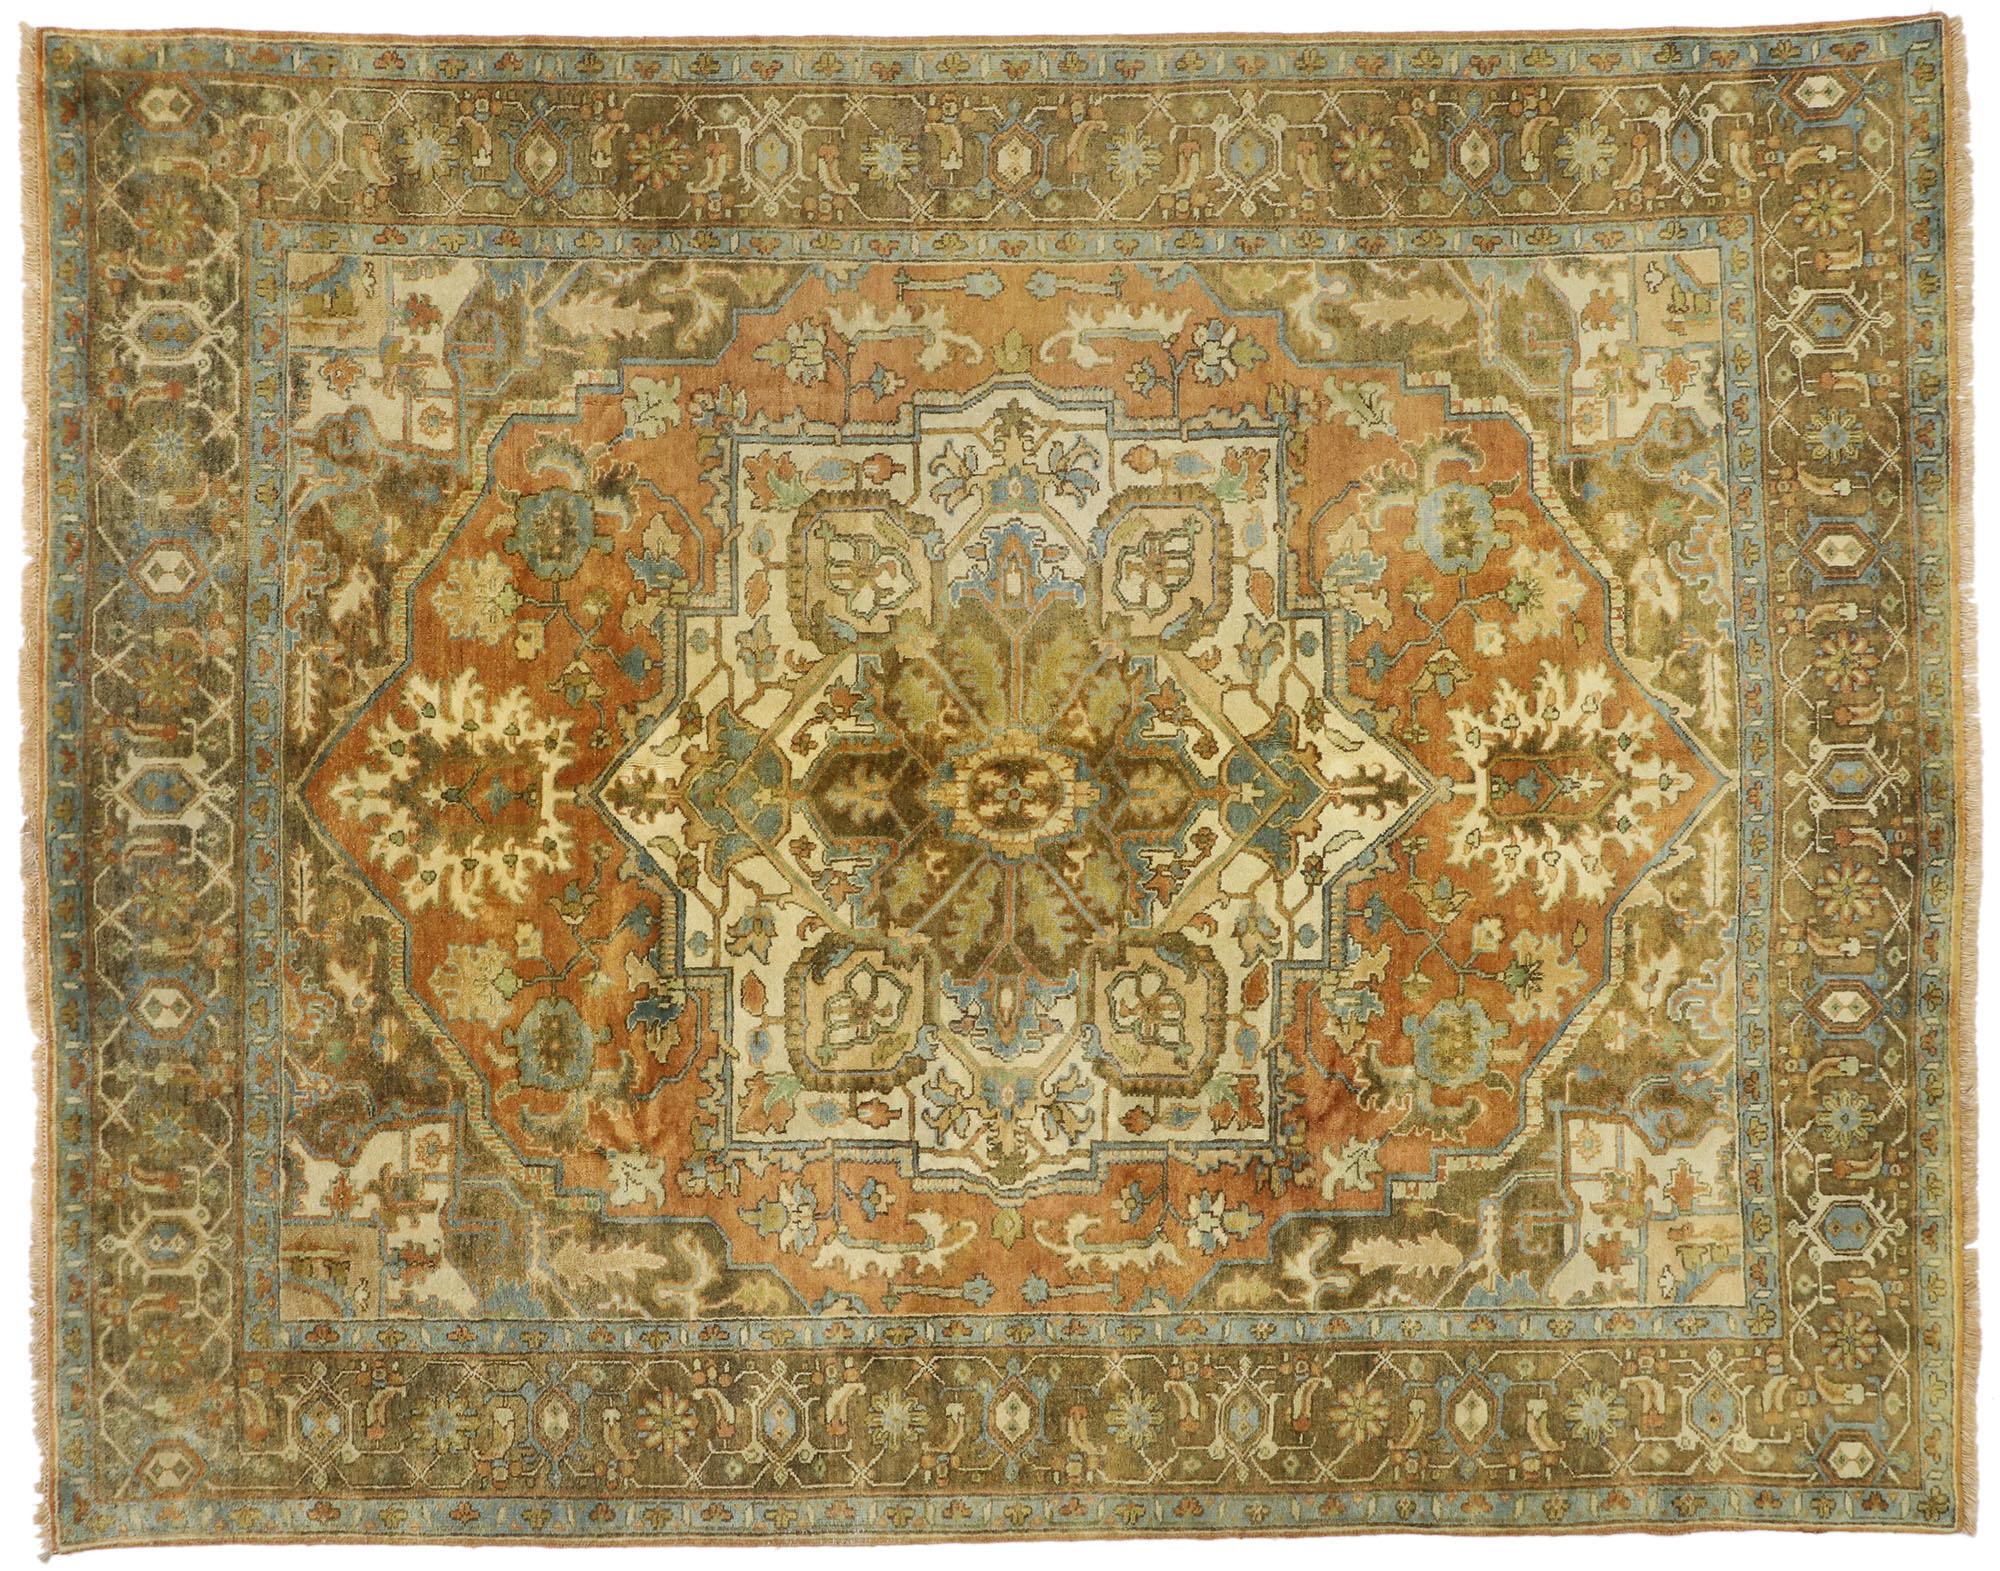 77309 Vintage Persian Heriz rug, 08'01 x 10'03. Warm and inviting with incredible detail and texture, this hand-knotted wool vintage Persian Heriz rug is a captivating vision of woven beauty. The eye-catching octofoil center medallion and earthy